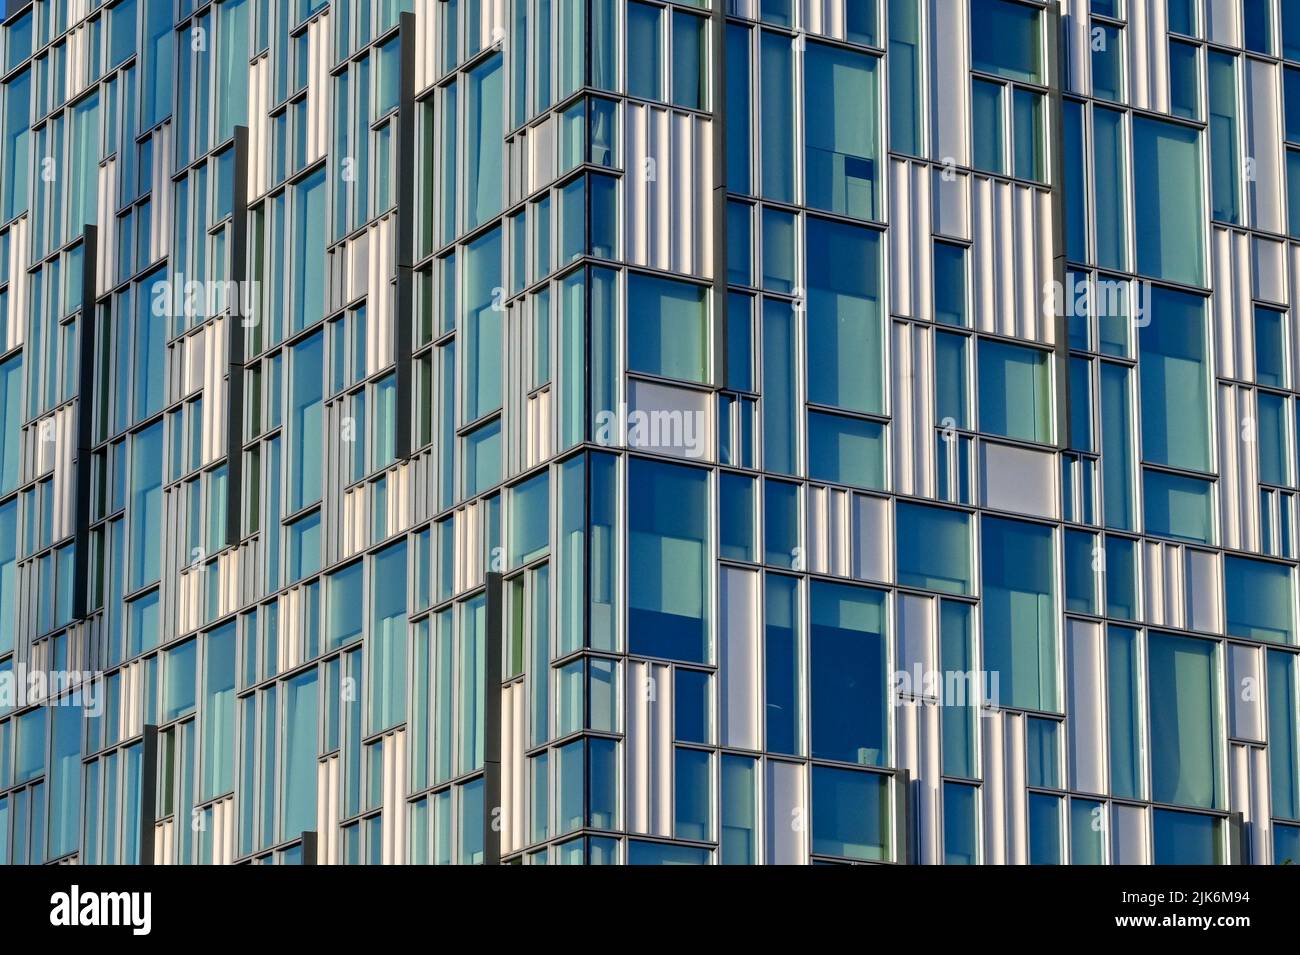 London, England - June 2022: Pattern formed by external cladding on a building near the O2 Arena in London's Docklands Stock Photo